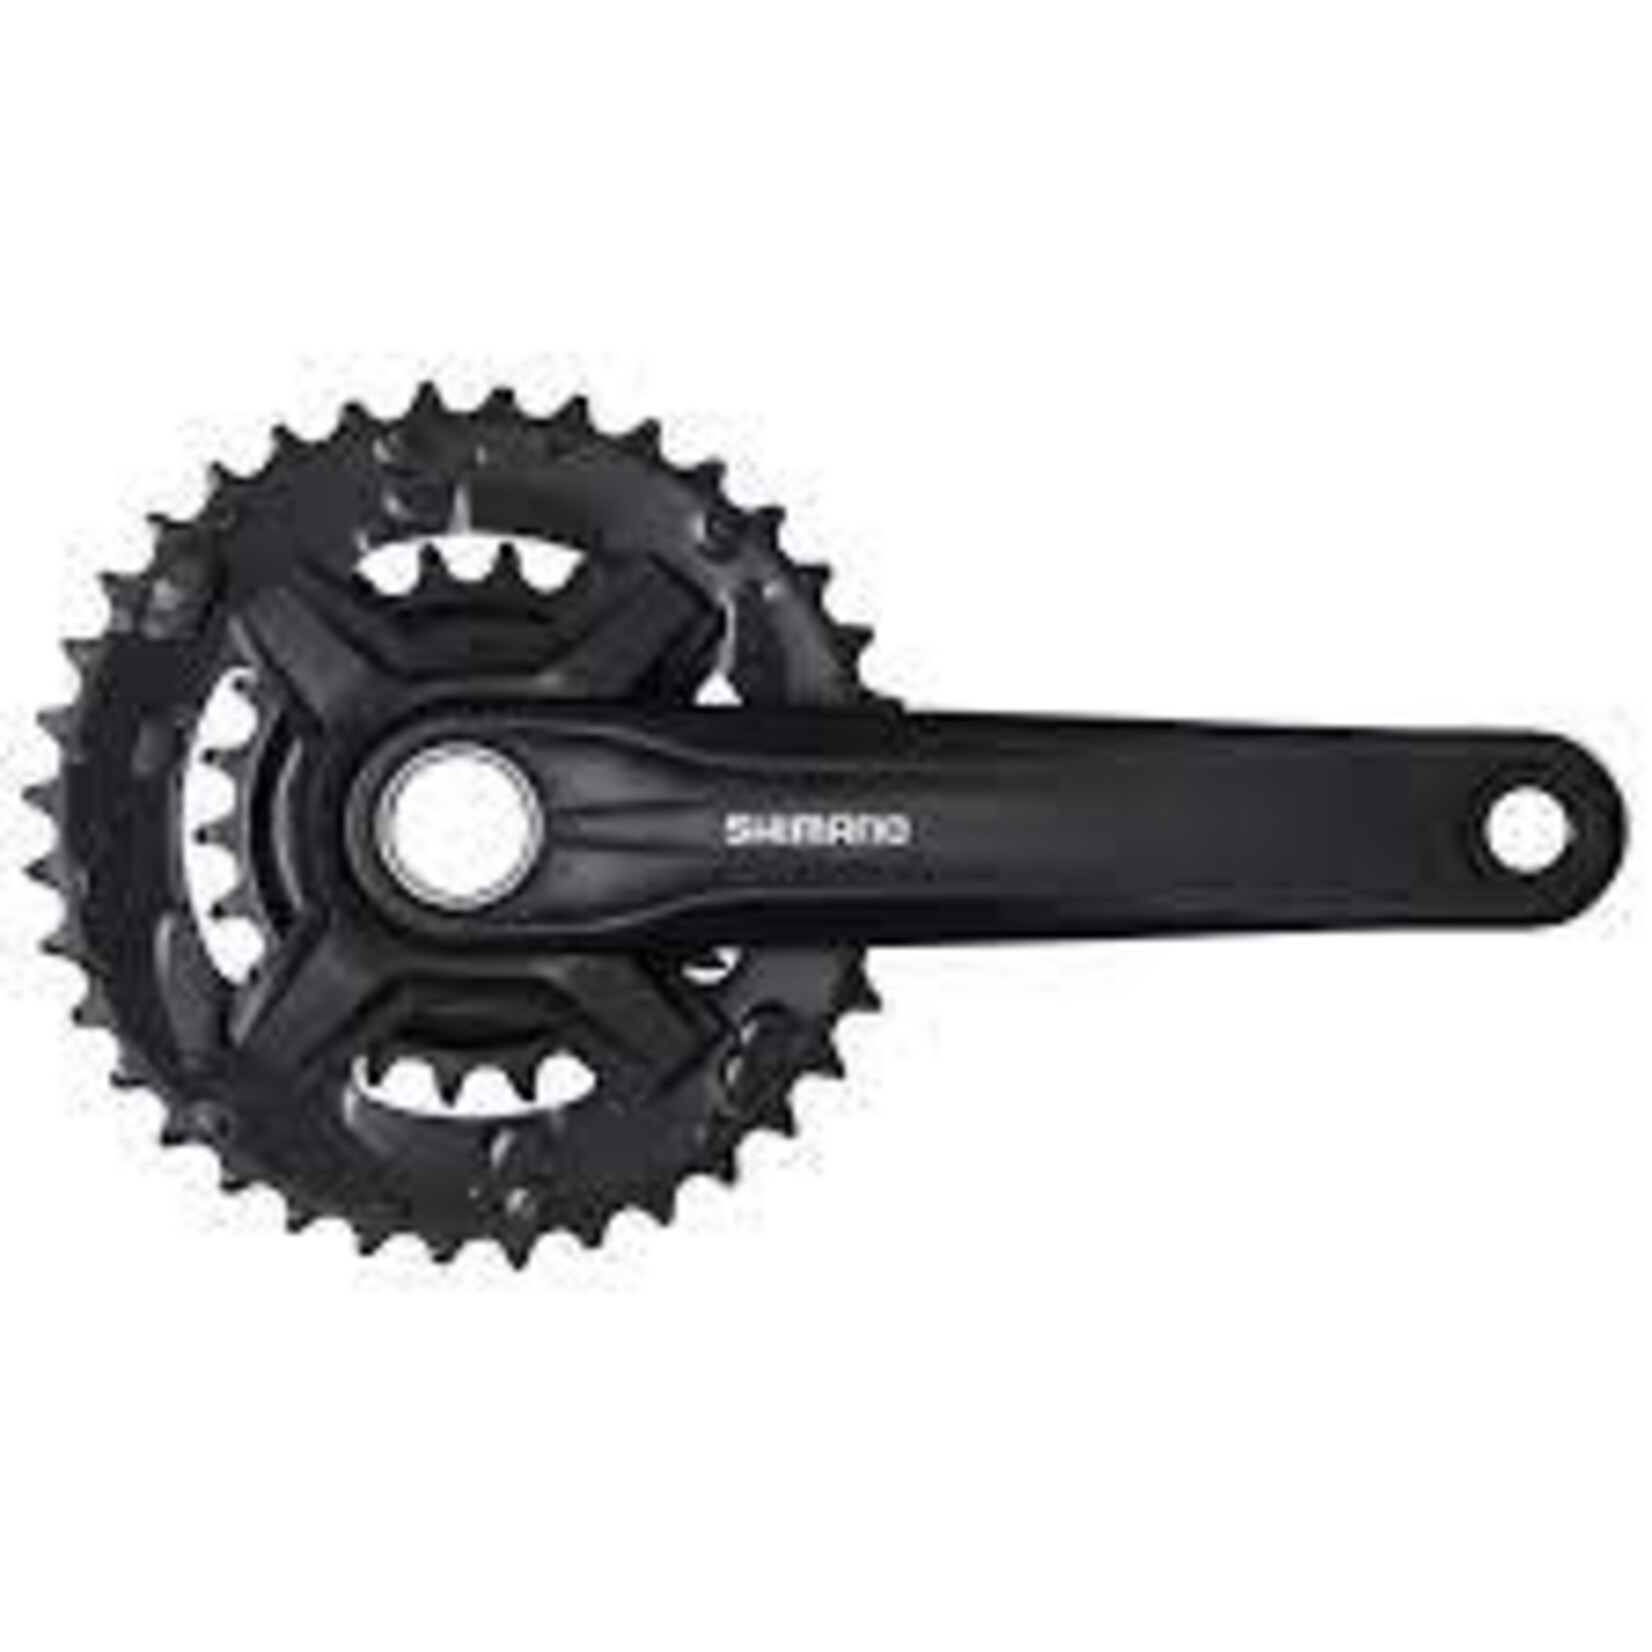 Shimano FRONT CHAINWHEEL, FC-MT210-B2, FOR REAR 9-SPEED, 2-PCS FC, 175MM, 36-22T W/O CHAIN GUARD, W/O BB, CHAIN LINE 3MM OUTBOARD, BLACK,